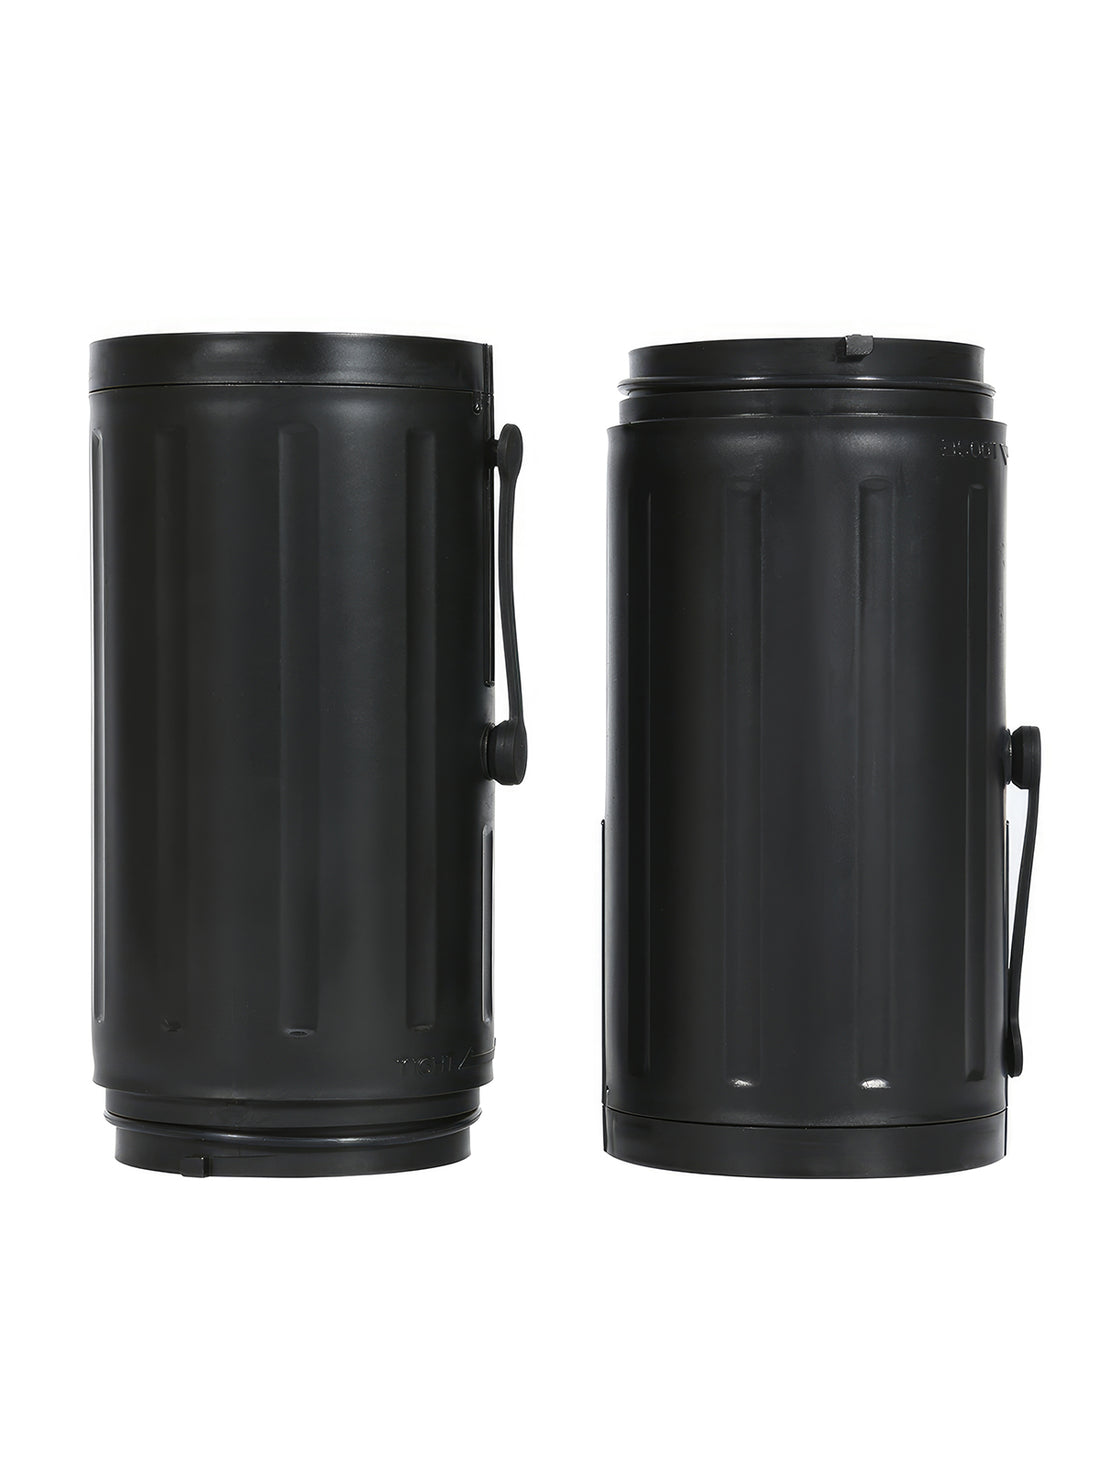 NA-2 Activated Carbon Filter